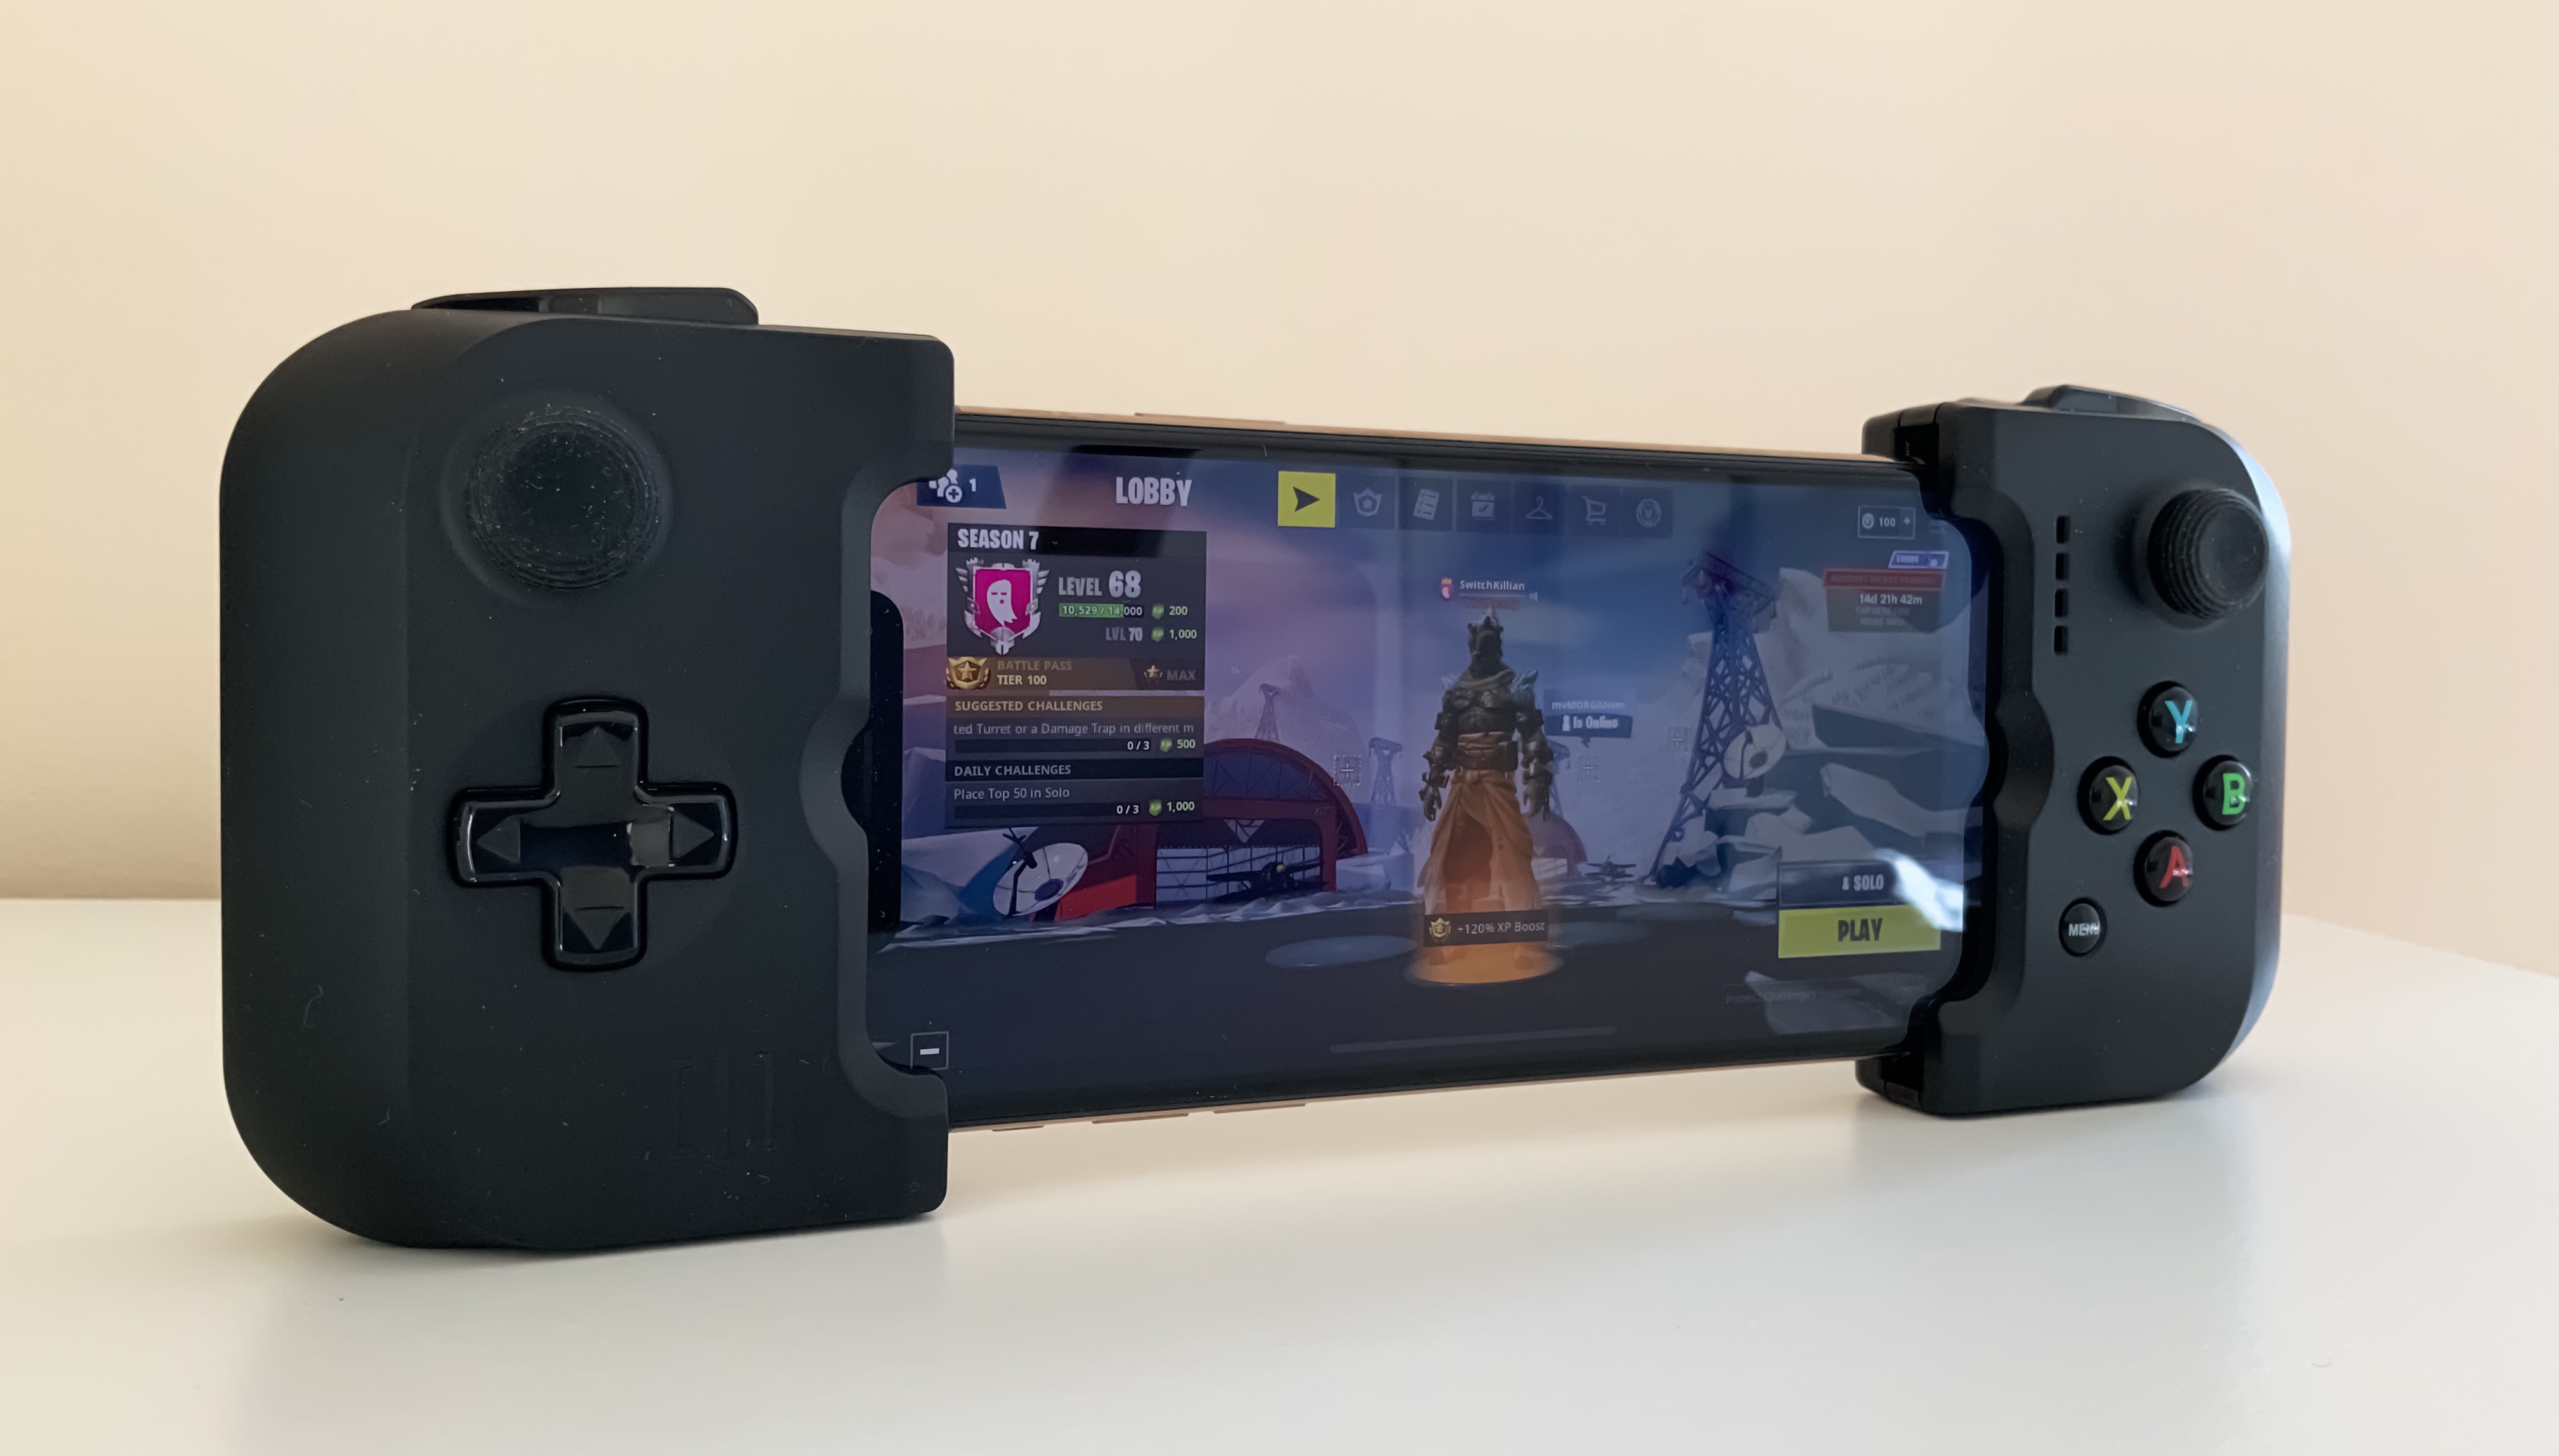 Fortnite with iPhone XS in Gamevice controller